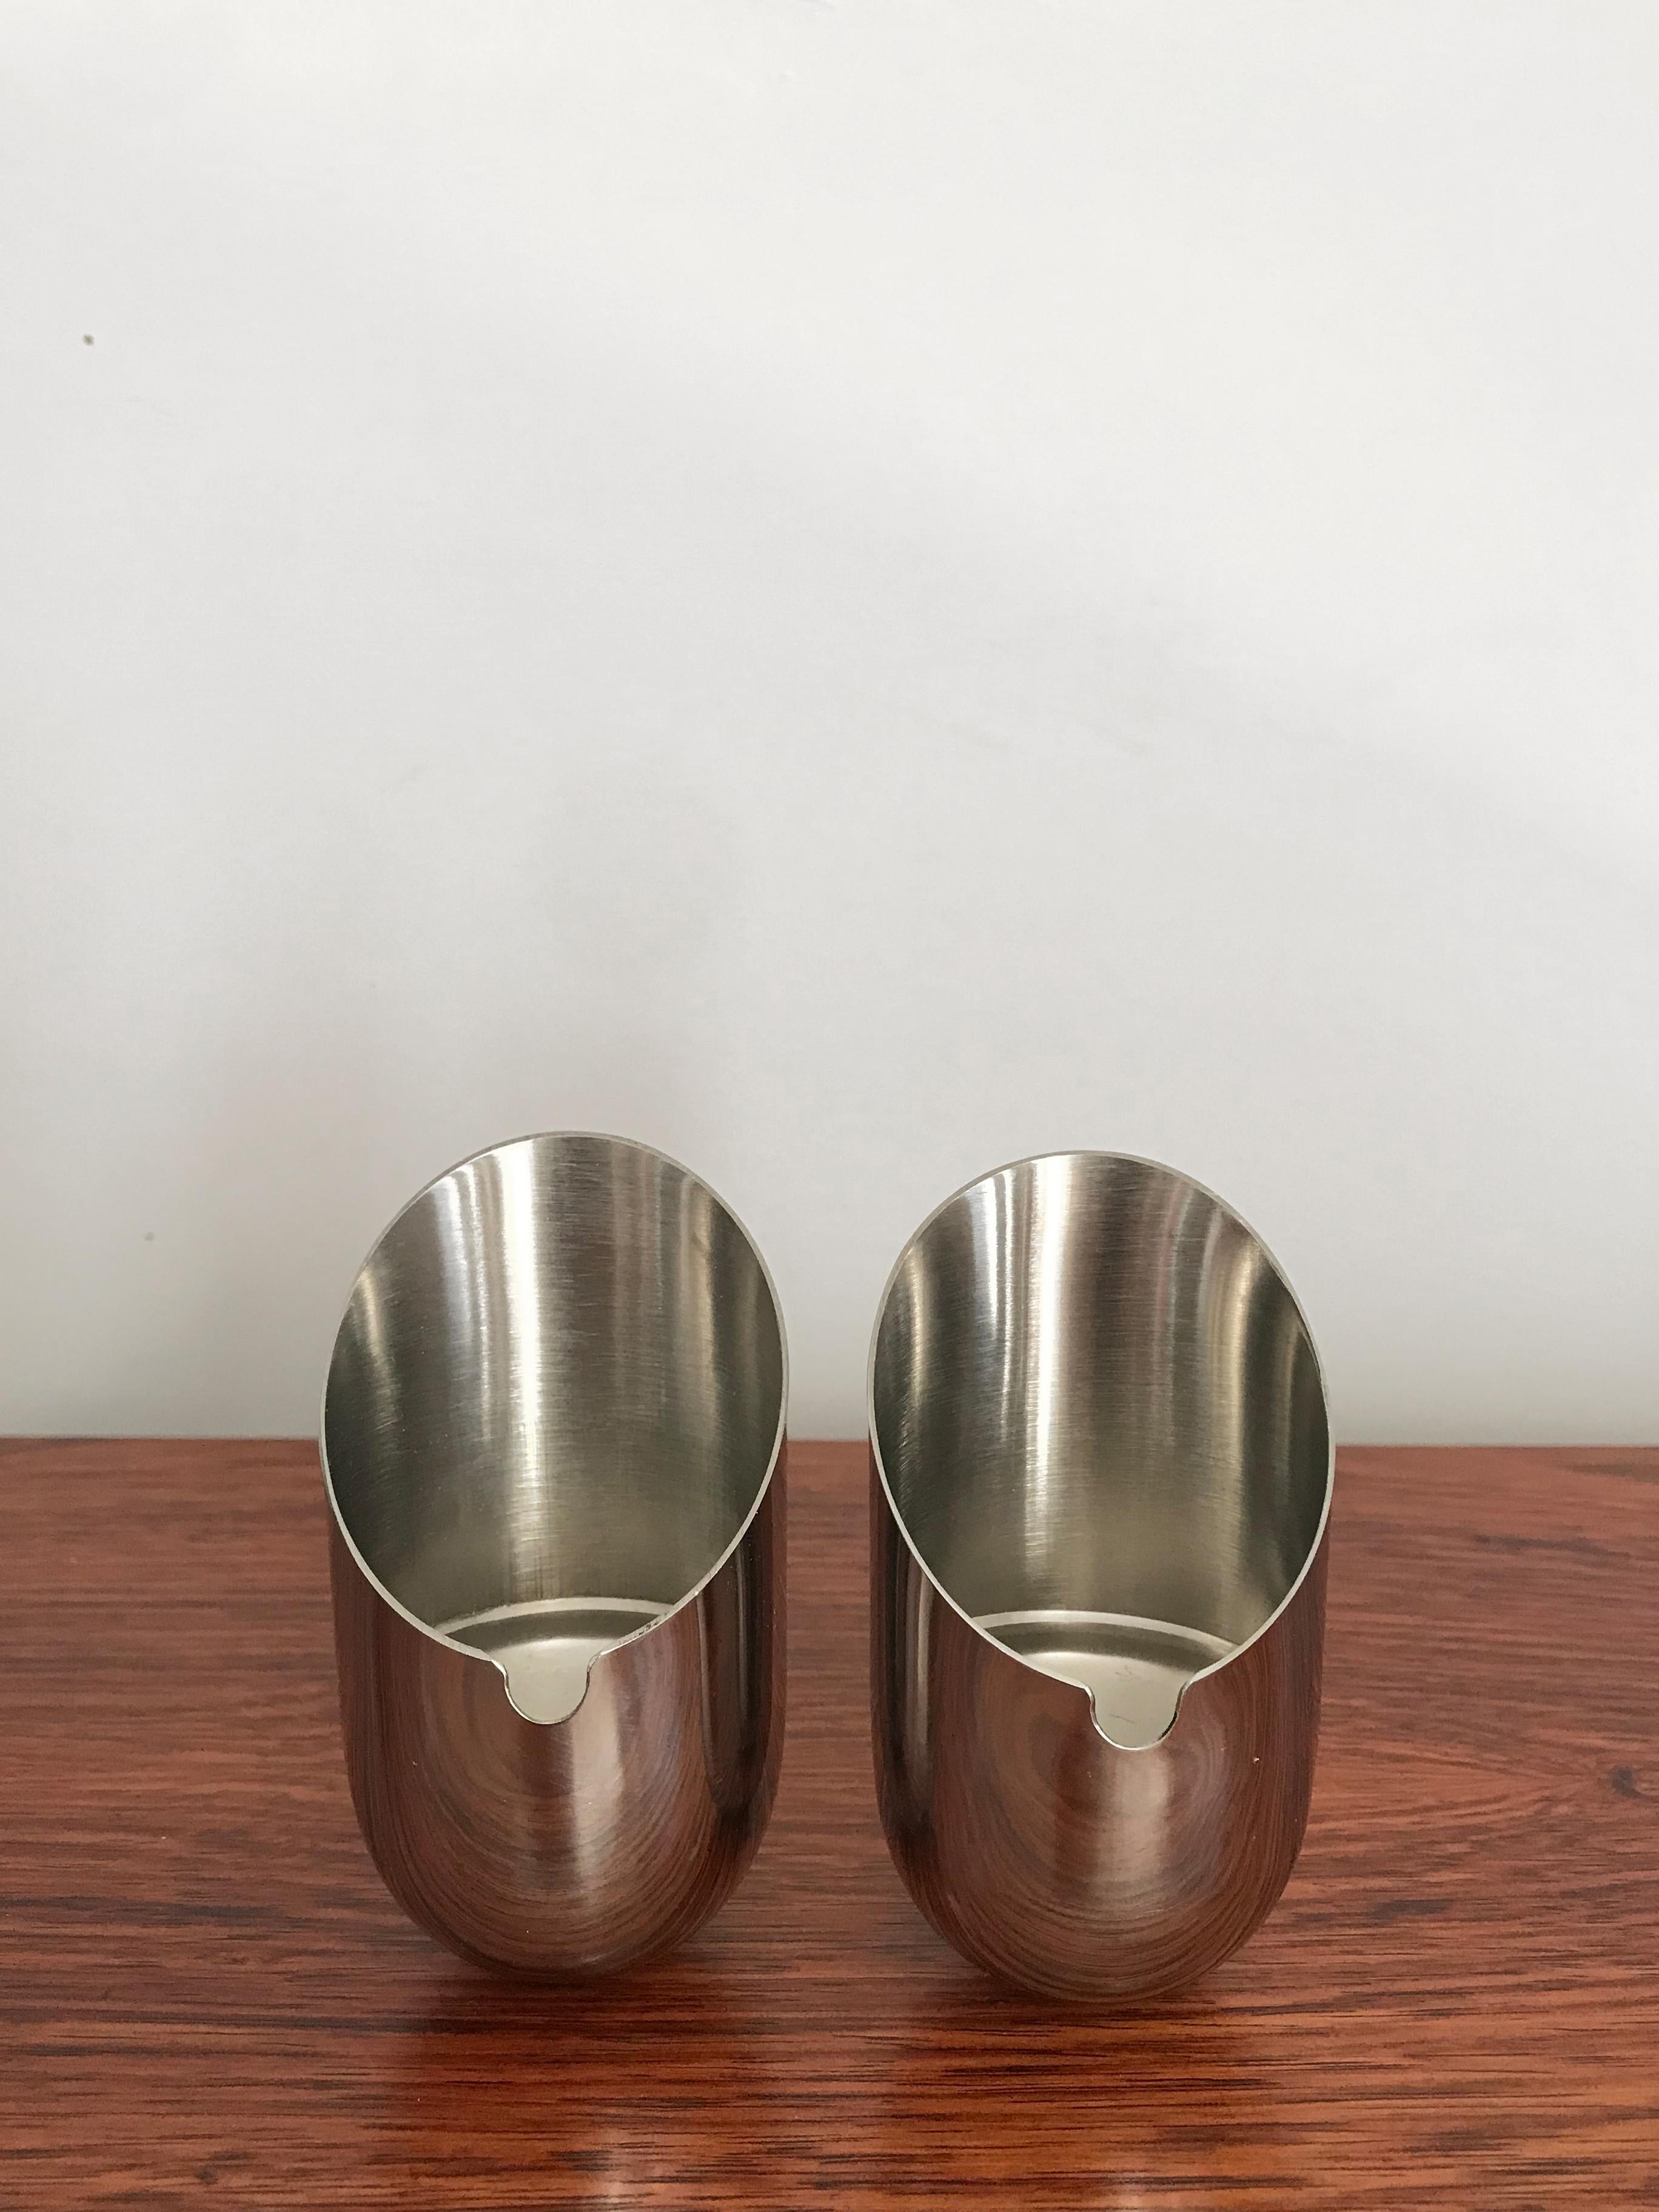 Couple of midcentury Italian stainless steel ashtrays model “Birillo” with original boxes designed by Ezio Didone for Valenti, thanks to the weighted base the ashtrays never tip over, even if they are moved they return to their original vertical